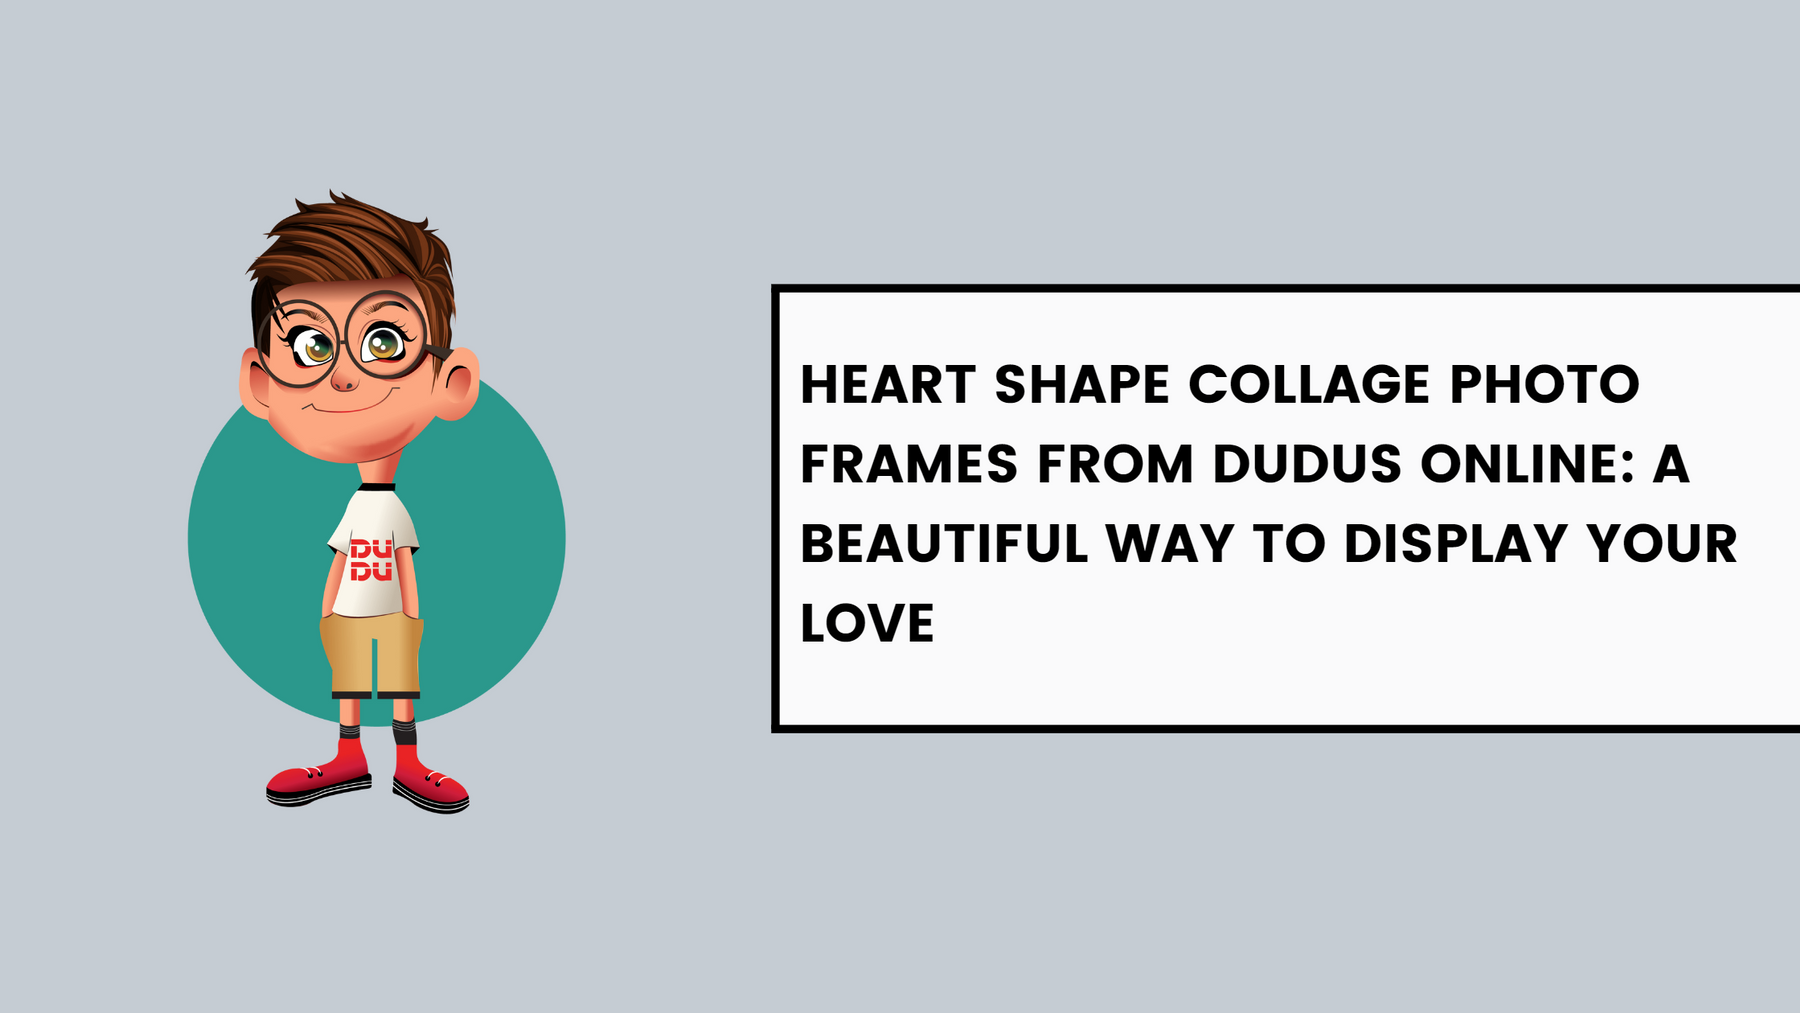 Heart Shape Collage Photo Frames from Dudus Online: A Beautiful Way to Display Your Love